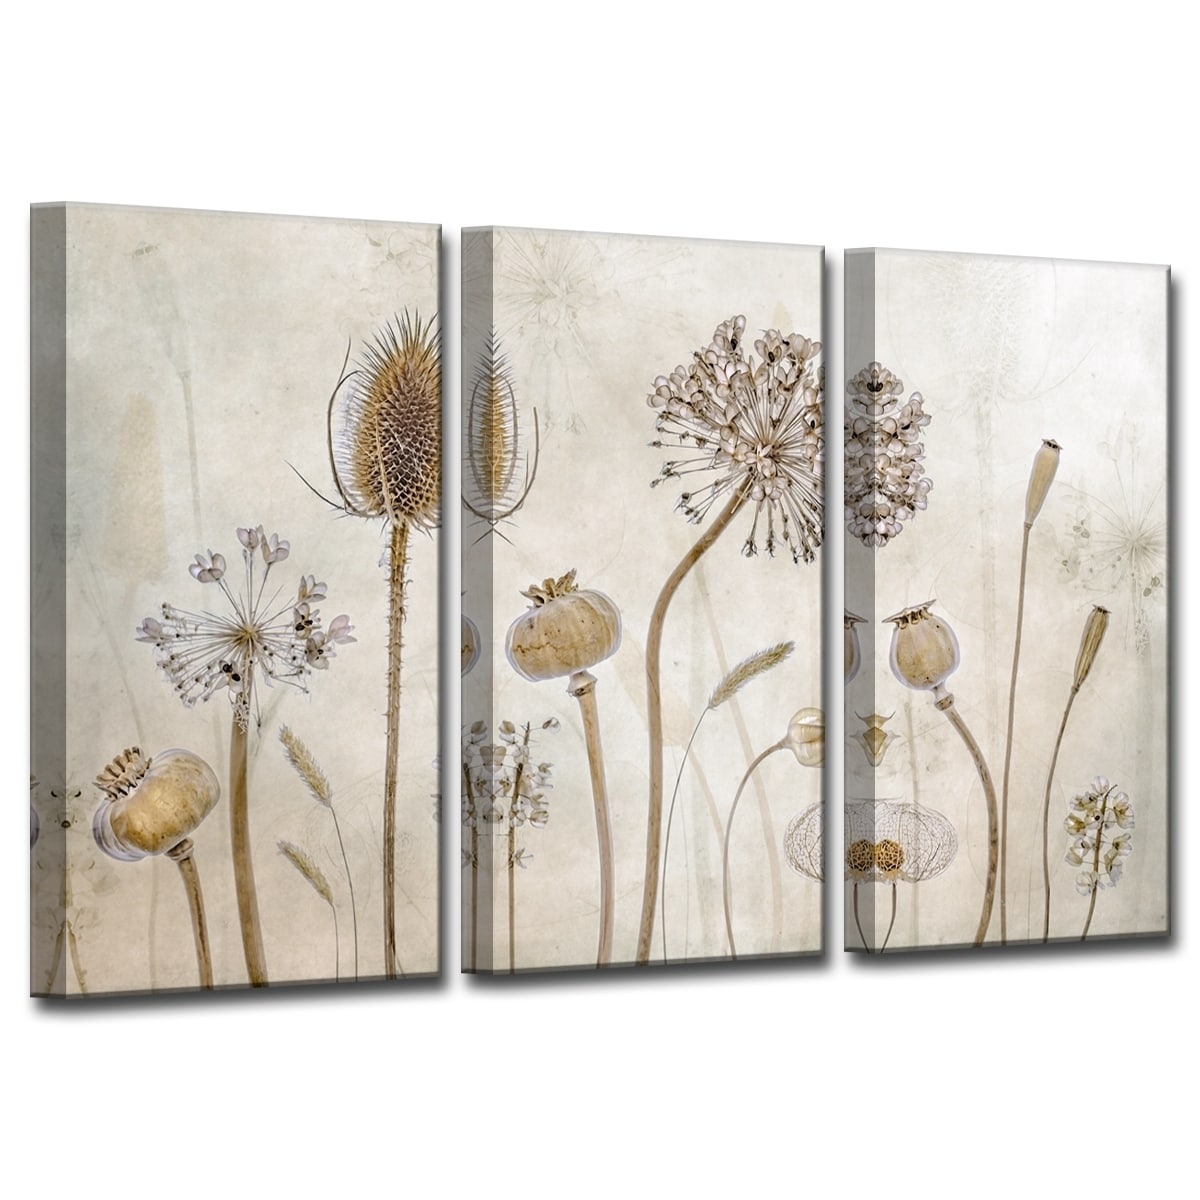 Ready2HangArt 'Growing Old' 3-Pc Canvas Wall Dundefinedcor 